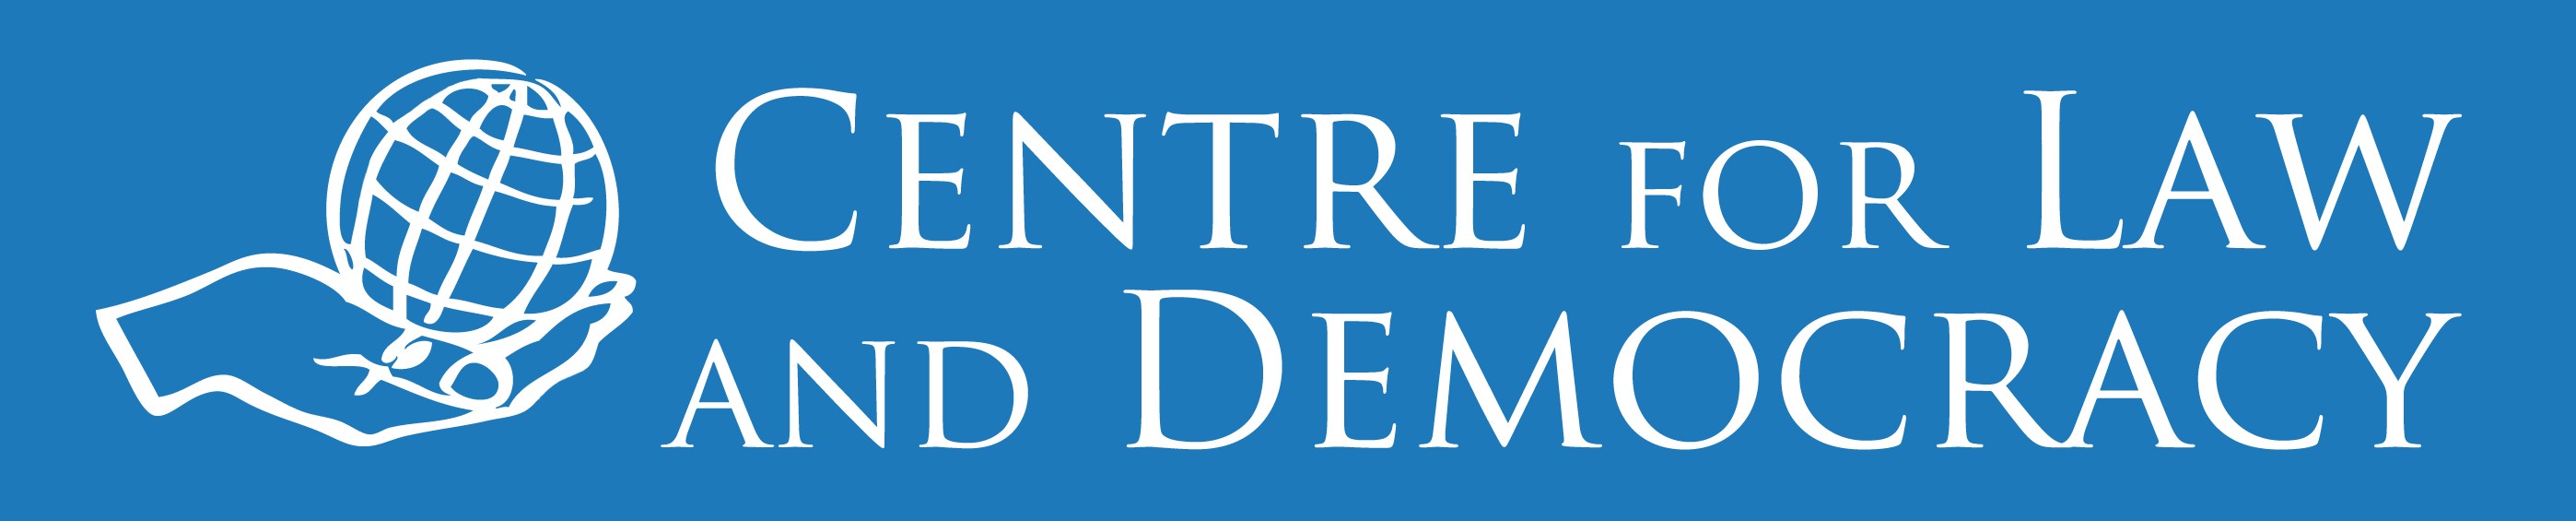 Centre for Law and Democracy